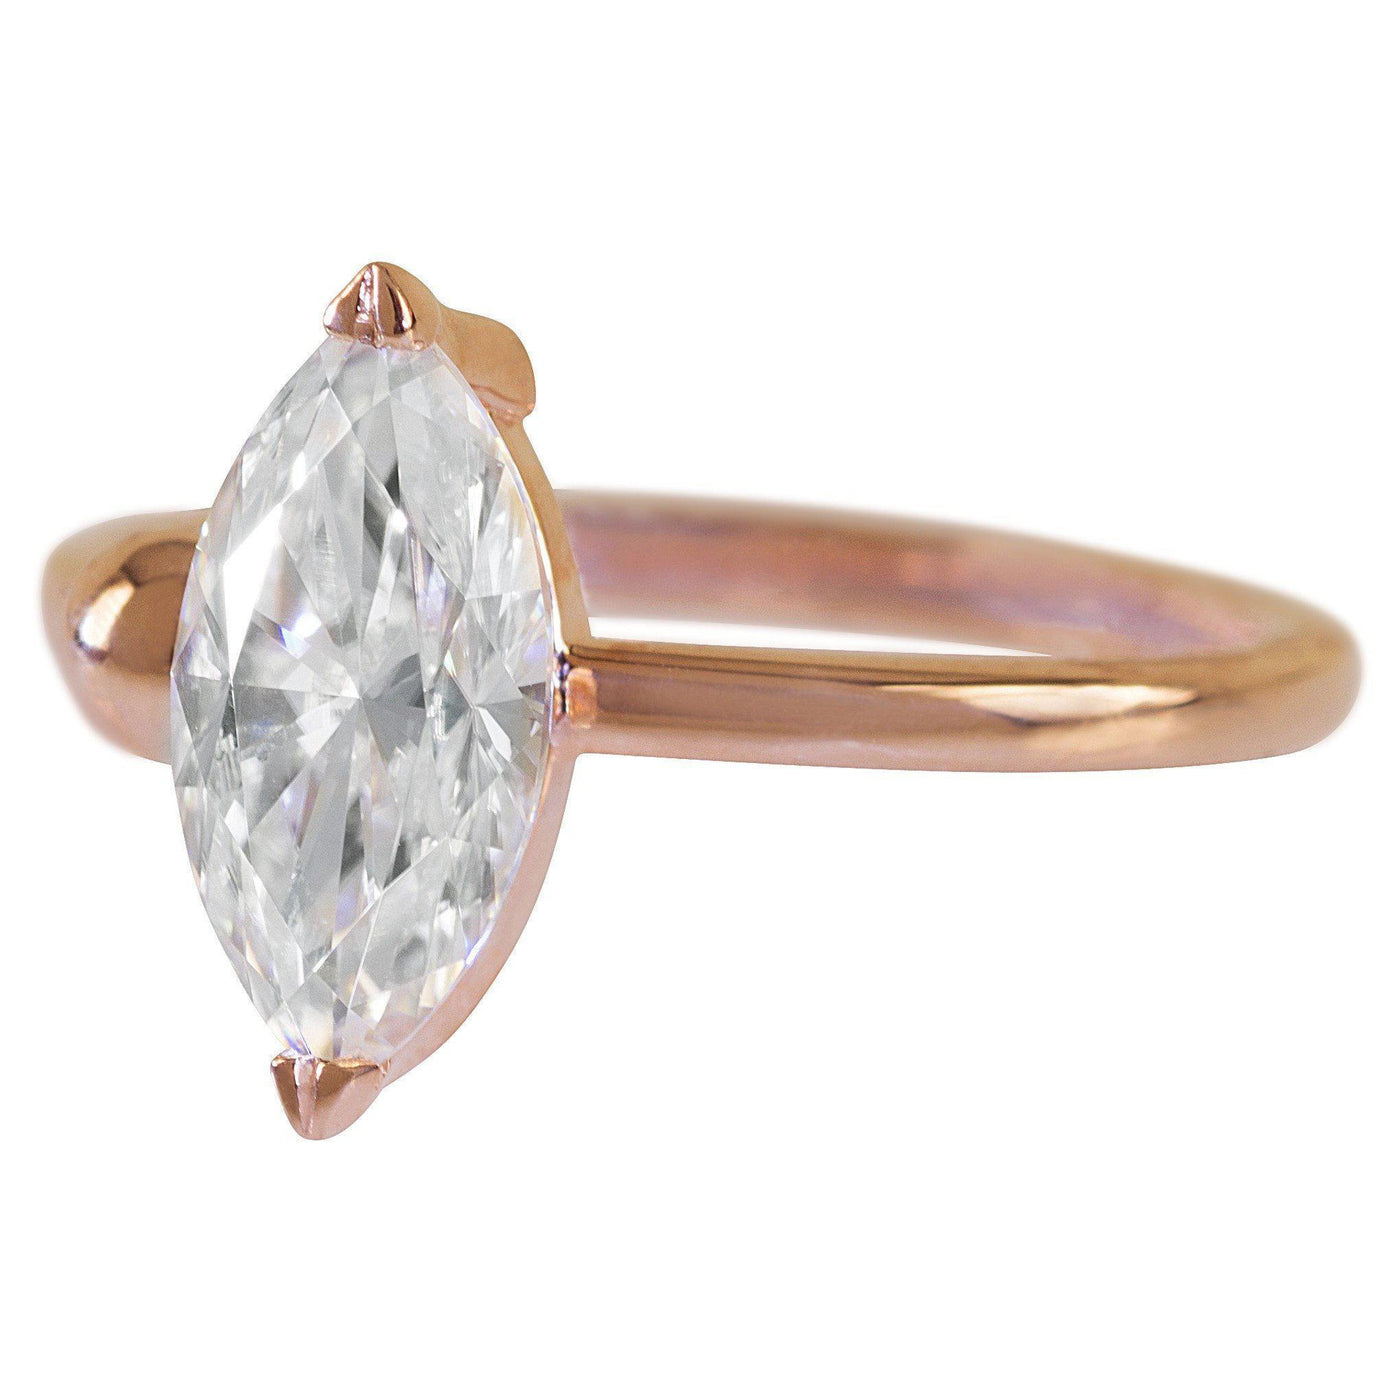 12x6mm or 1.8cts. DEW Marquise Moissanite Solitaire 14k Rose Gold Ring